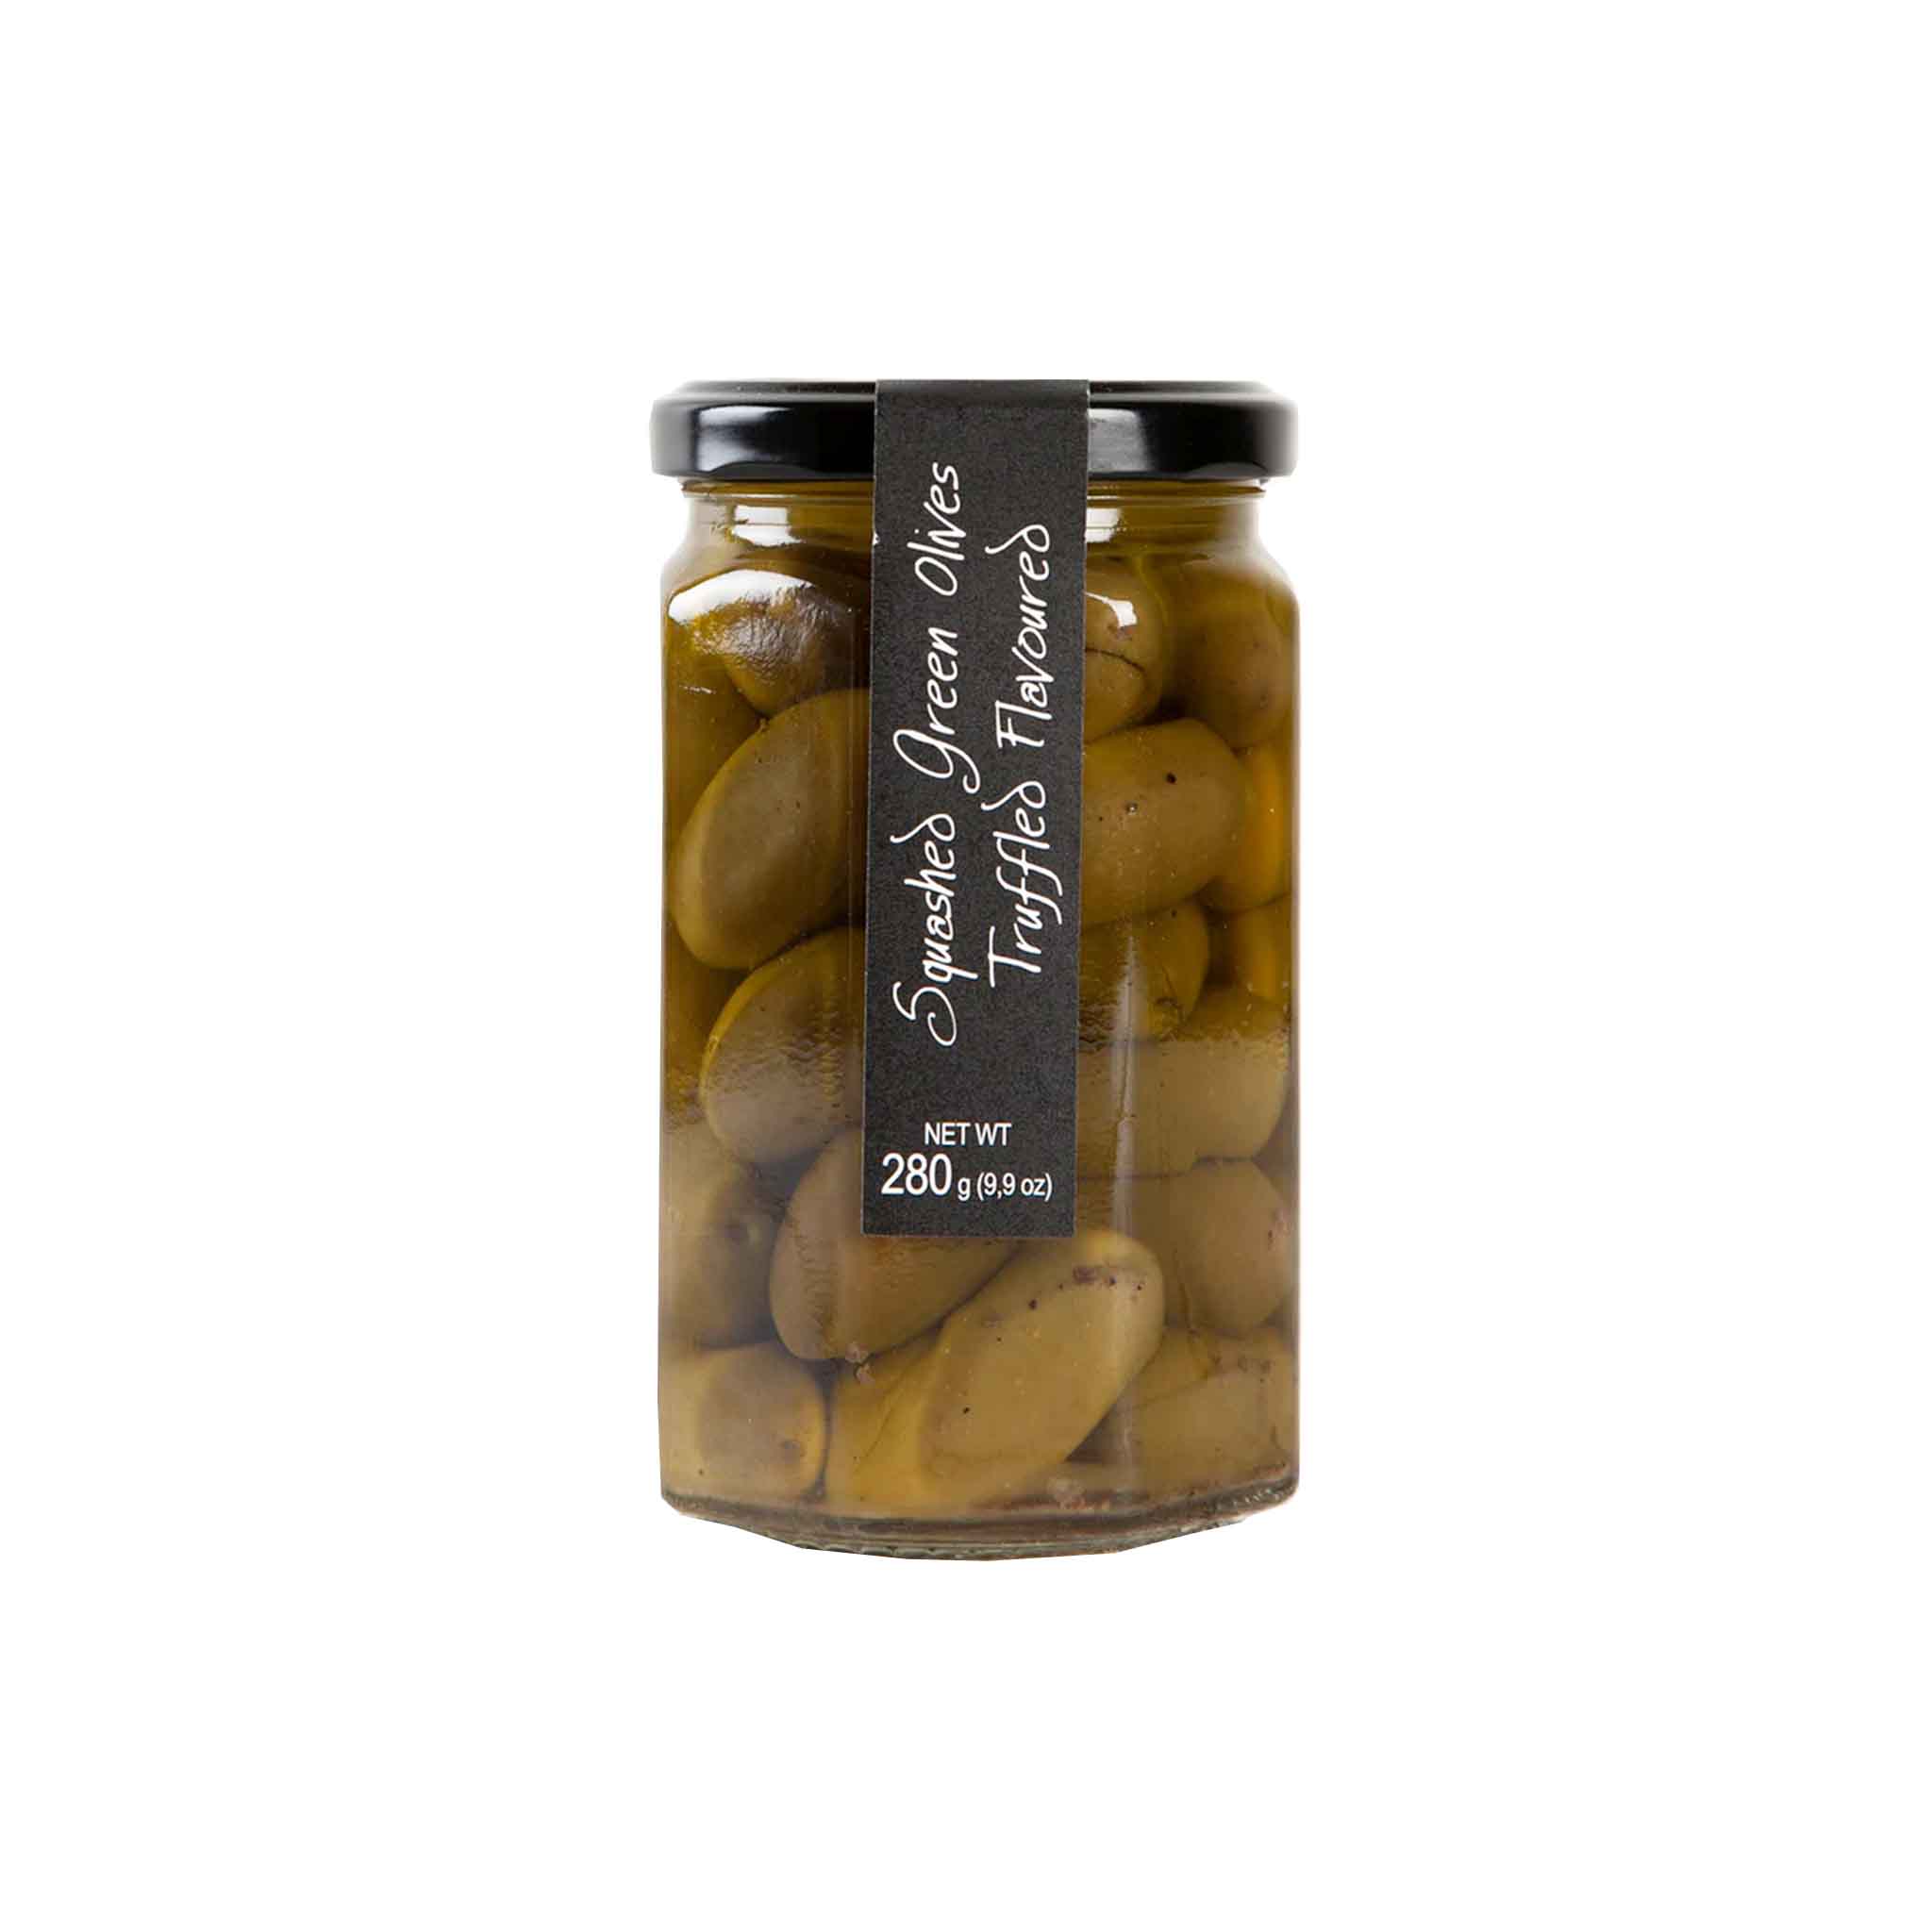 CASINA ROSSA TRUFFLE FLAVORED GREEN OLIVES 280g